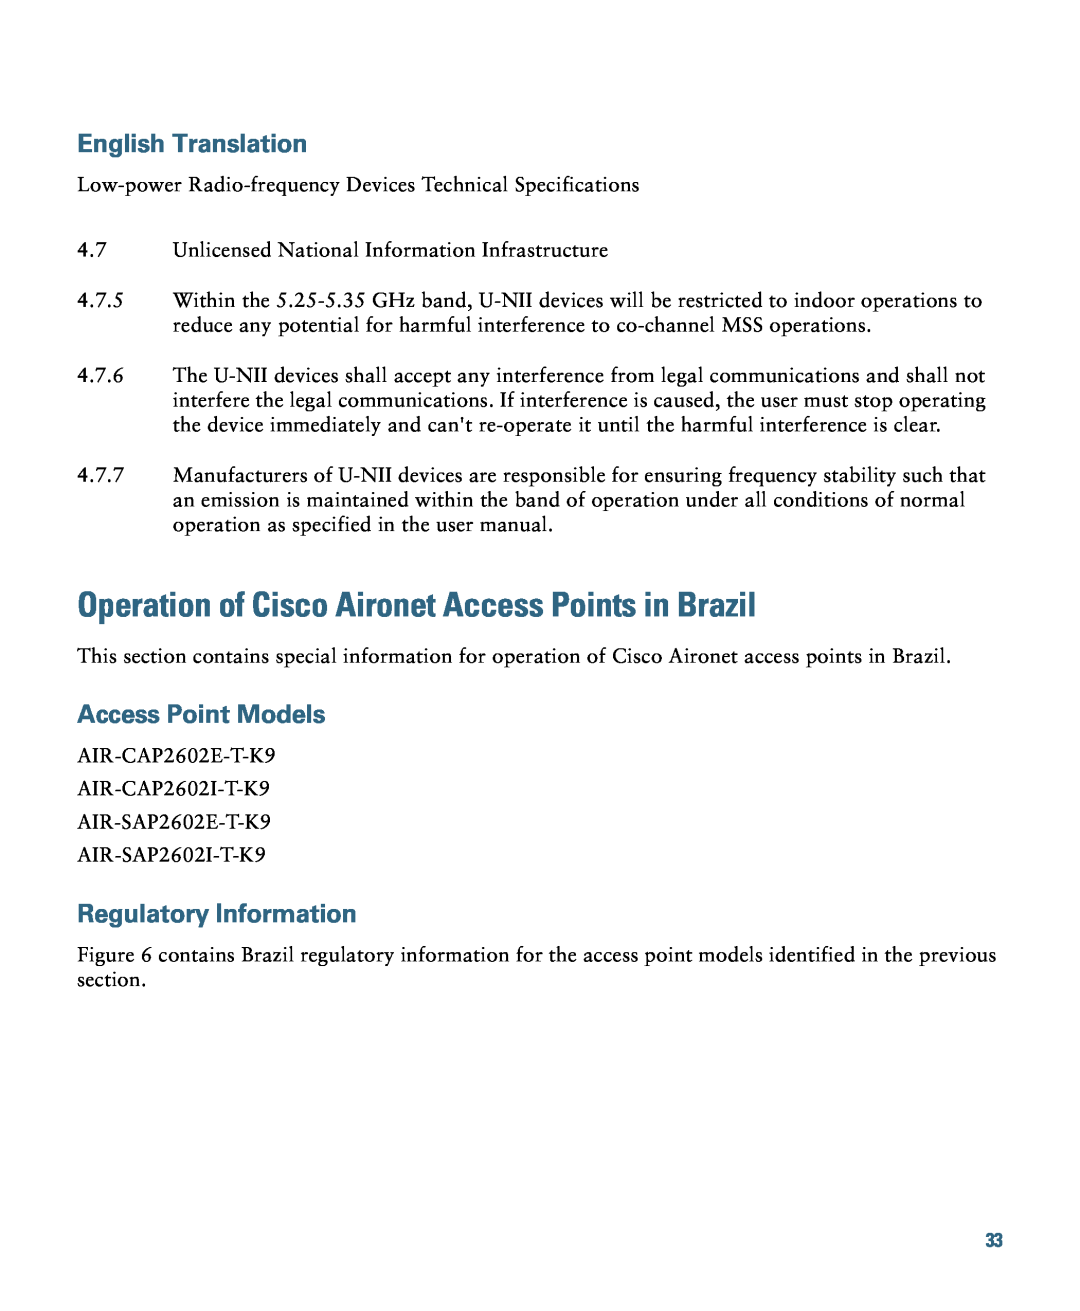 Cisco Systems AIRCAP2602IAK910, 2600I Operation of Cisco Aironet Access Points in Brazil, Access Point Models 